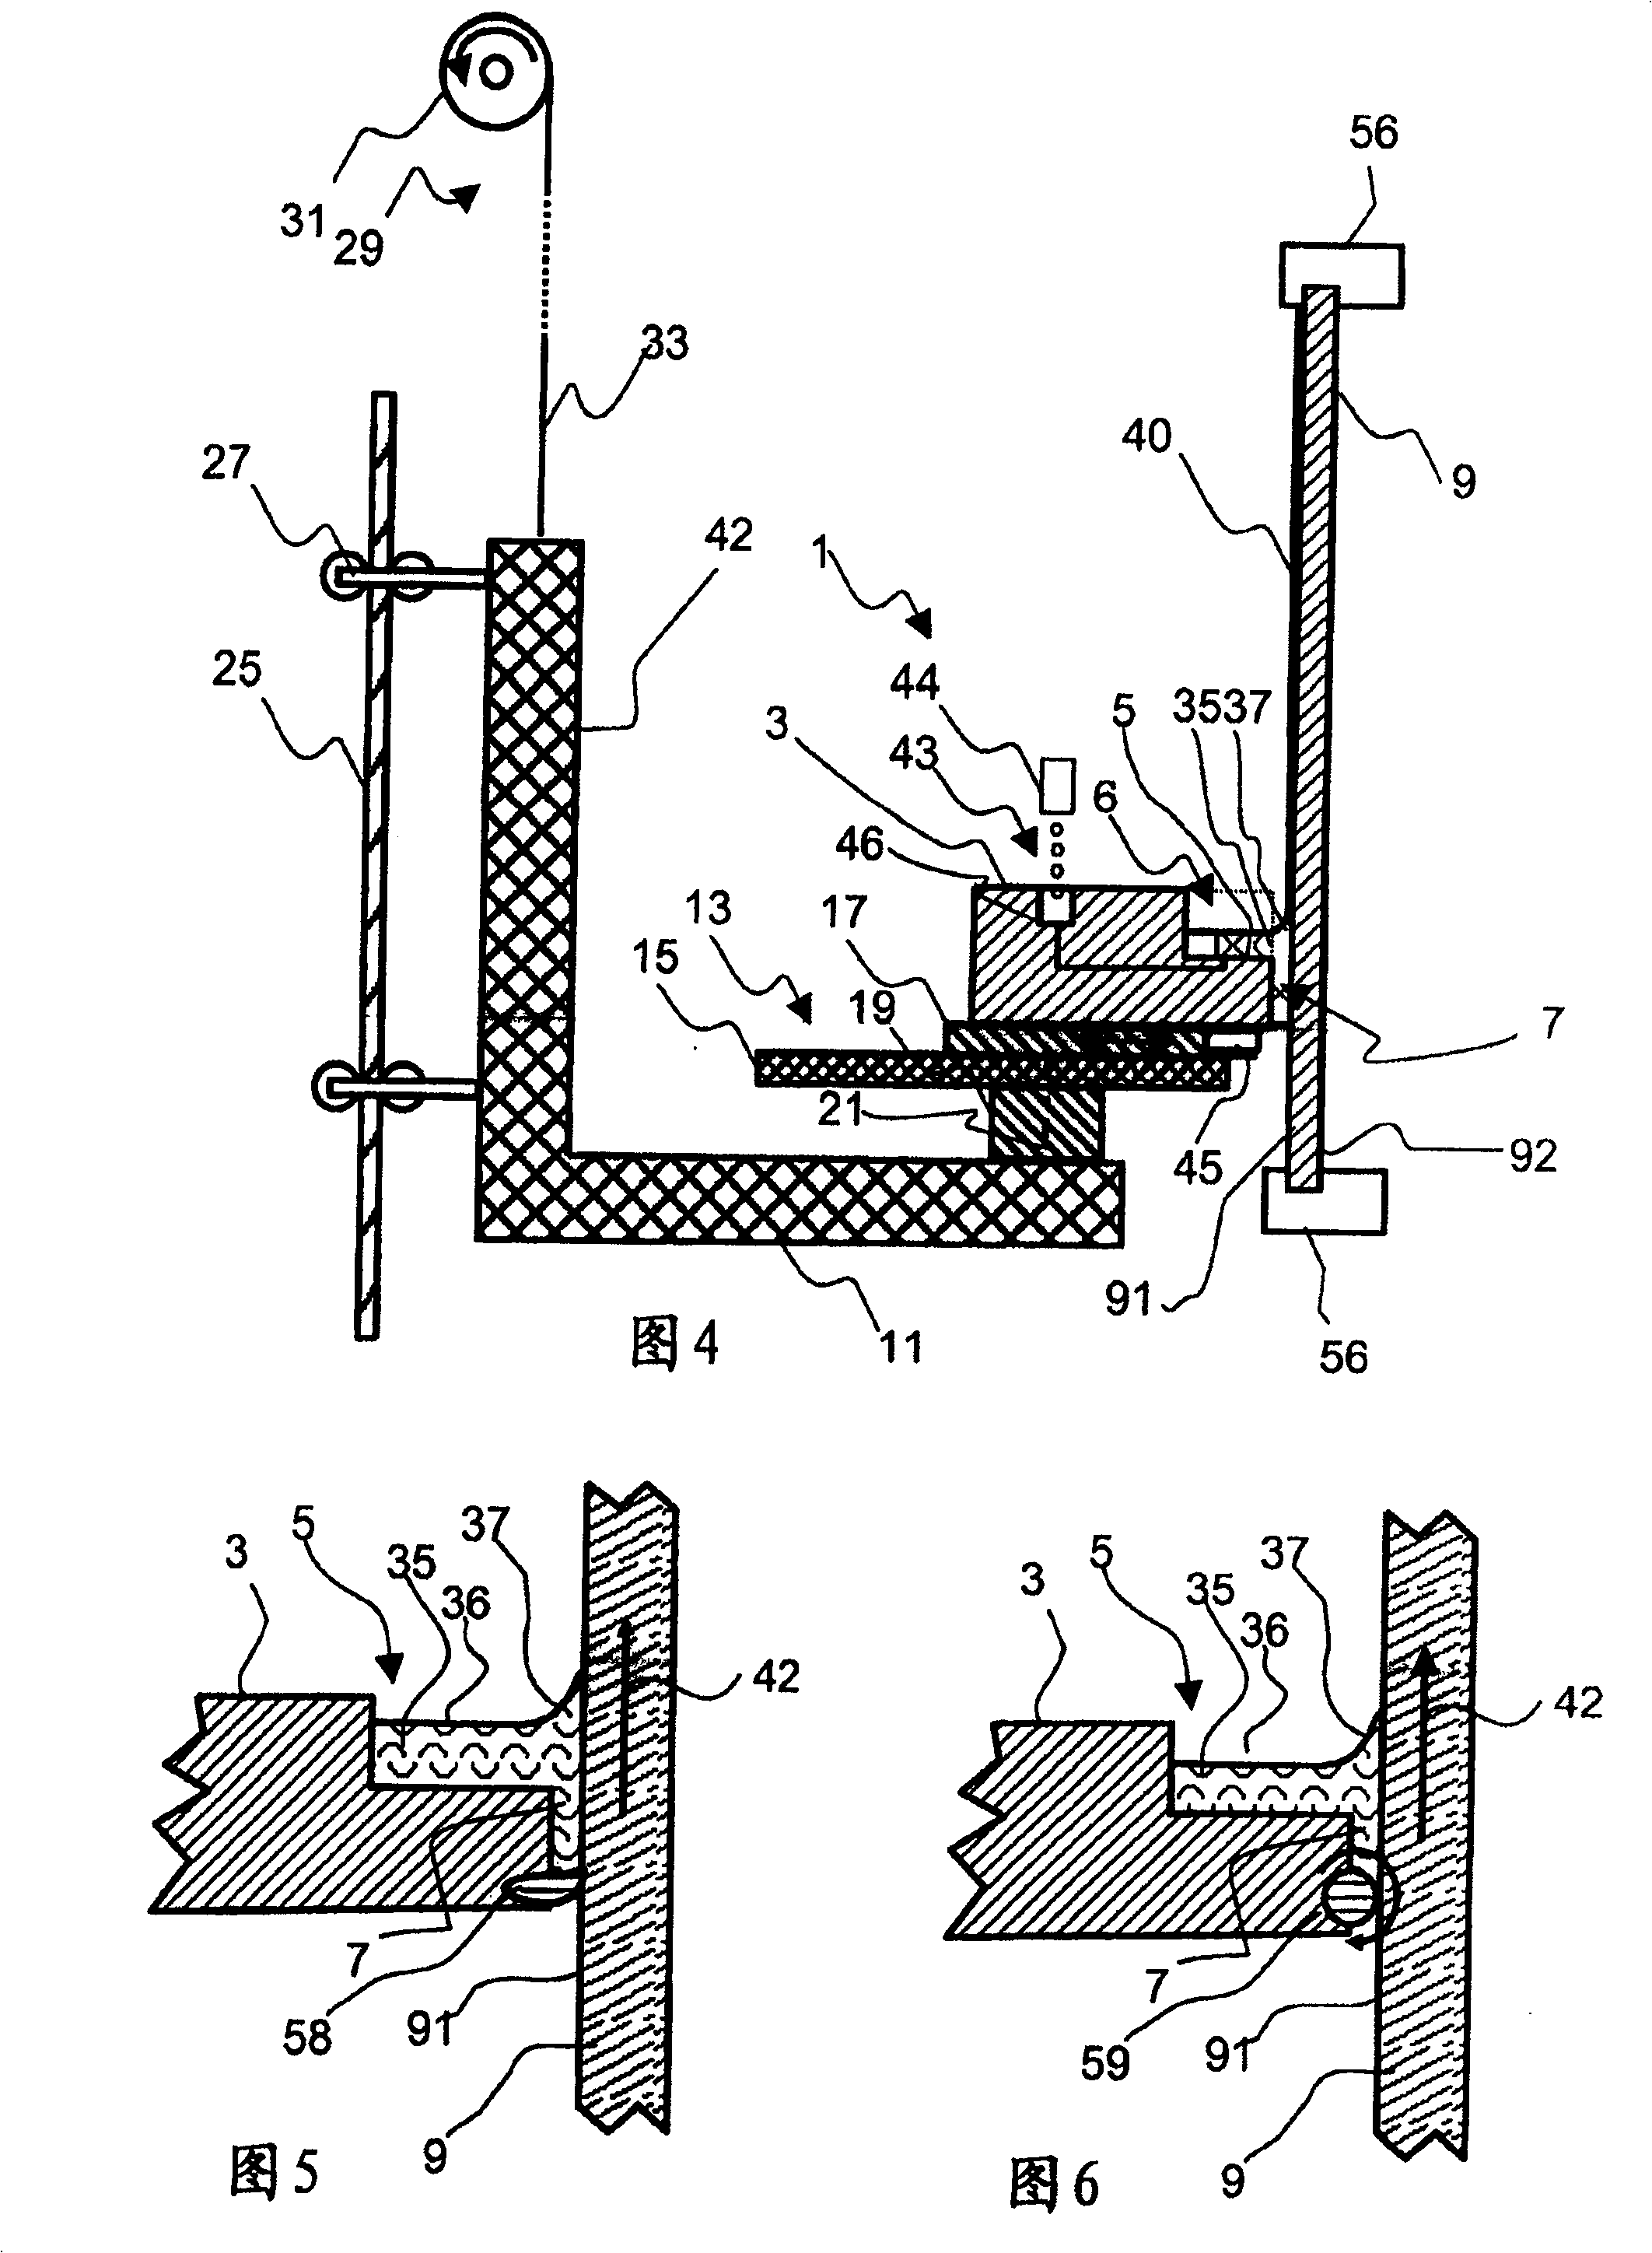 Process and apparatus for coating with a liquid